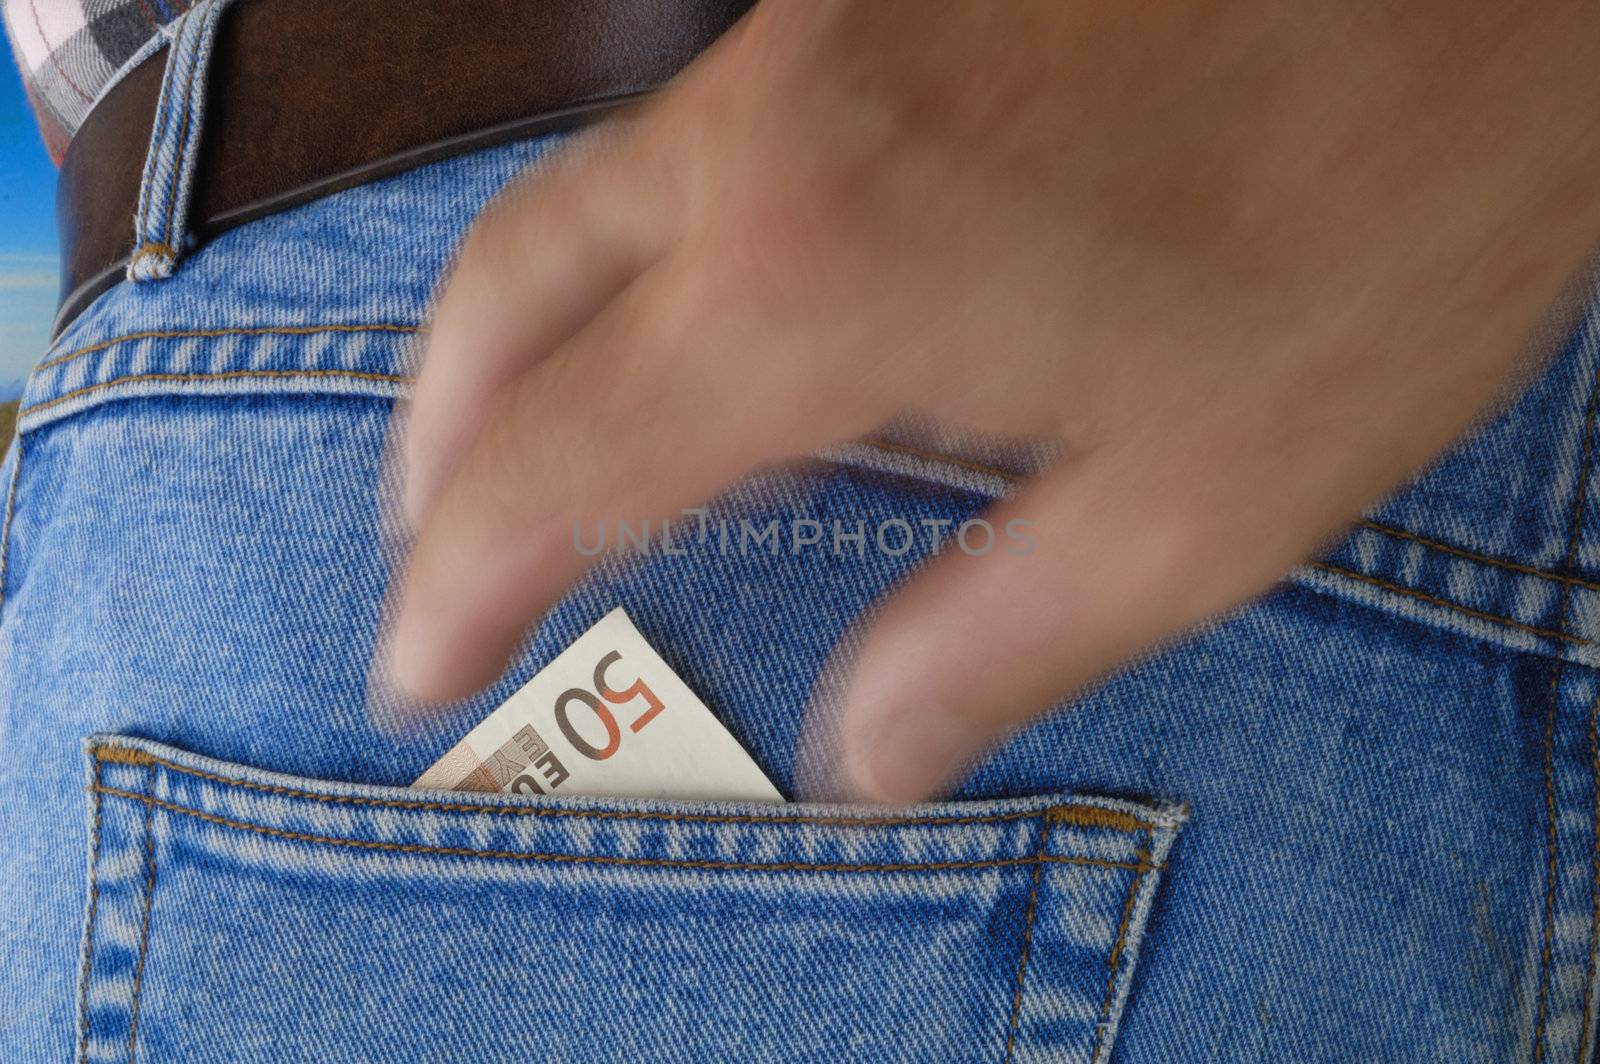 A 50 Euro bill poking out of the rear pocket of a traveller's jeans. Motion blur on a pickpocket's hand, about to take it.